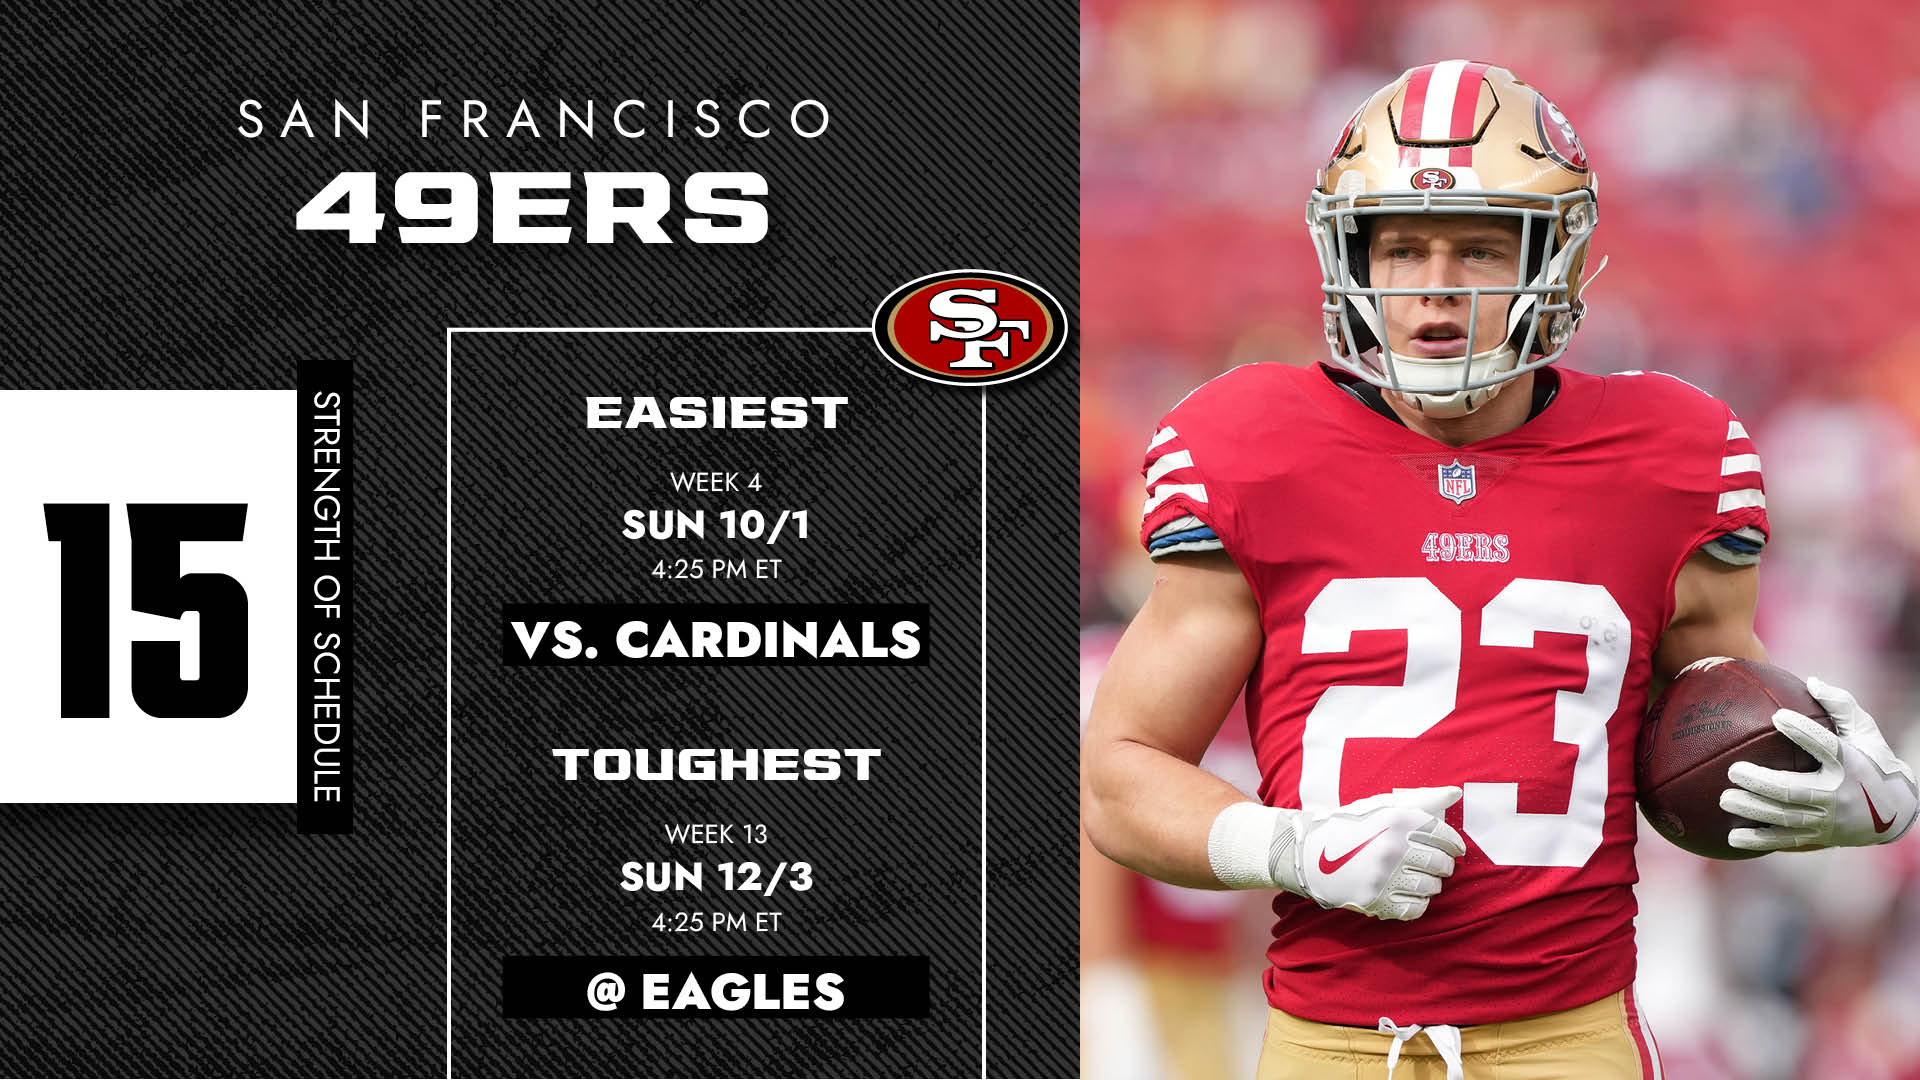 next game for 49ers